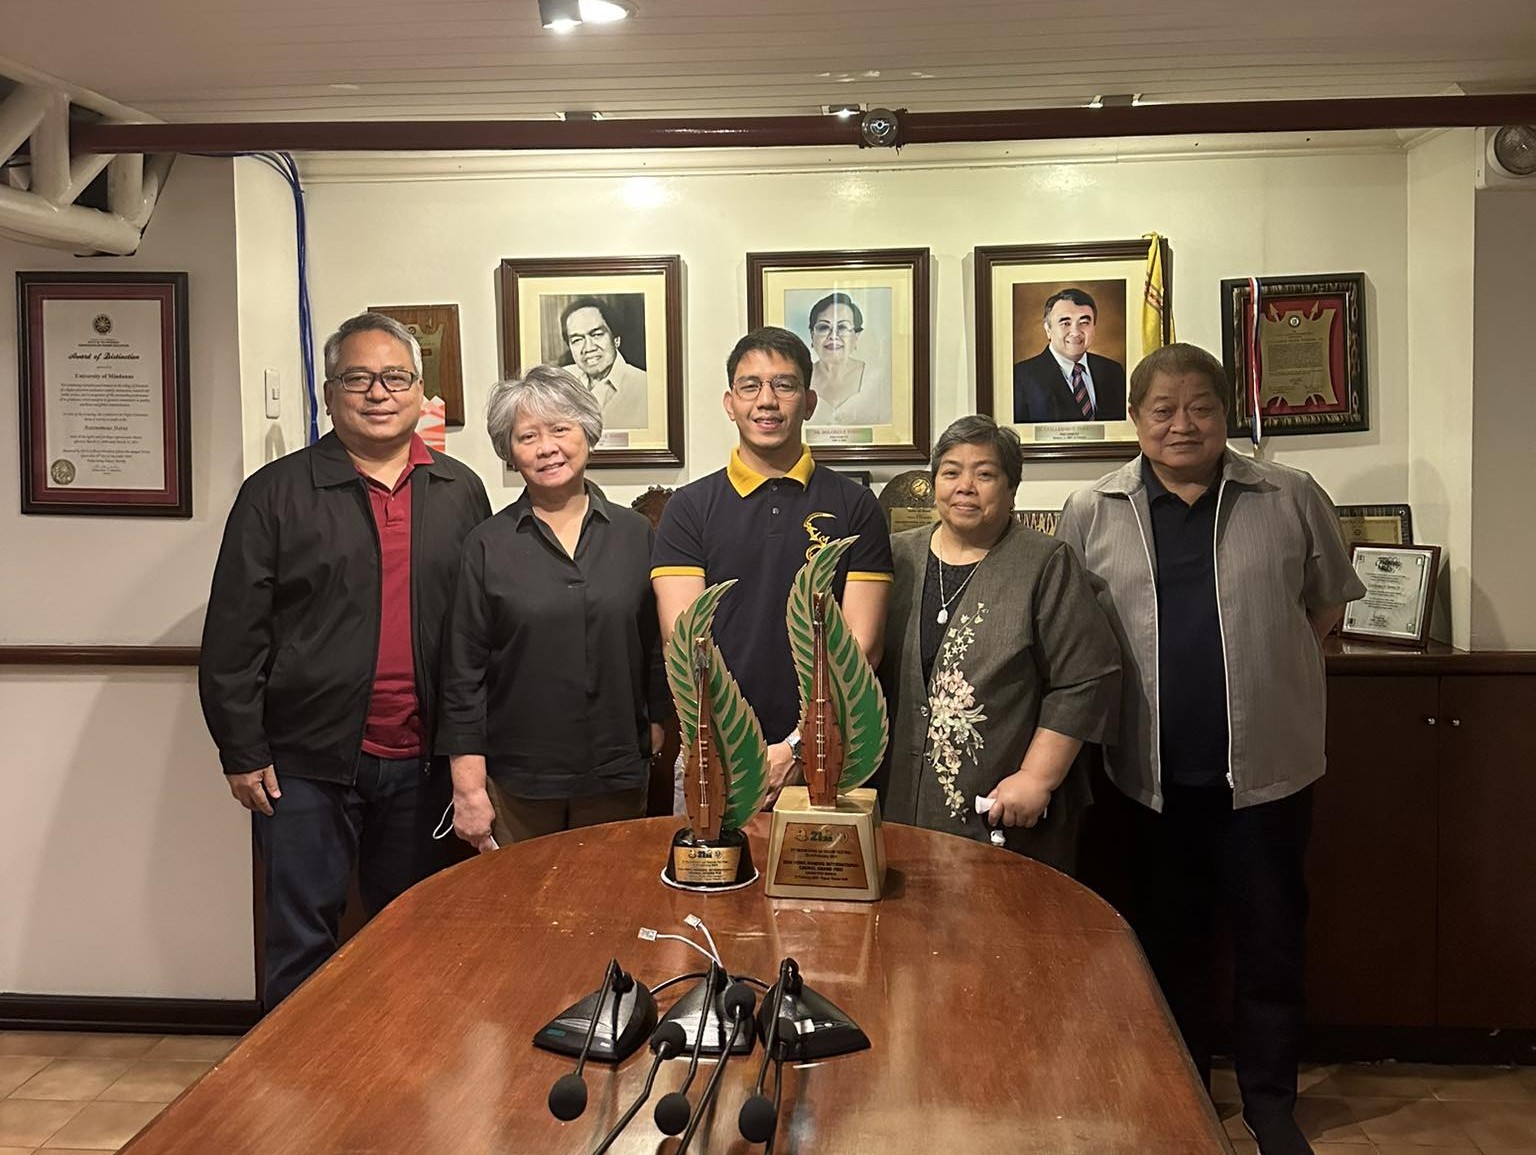 Conductor for award-winning UM Chorale pays courtesy visit to UM top officials